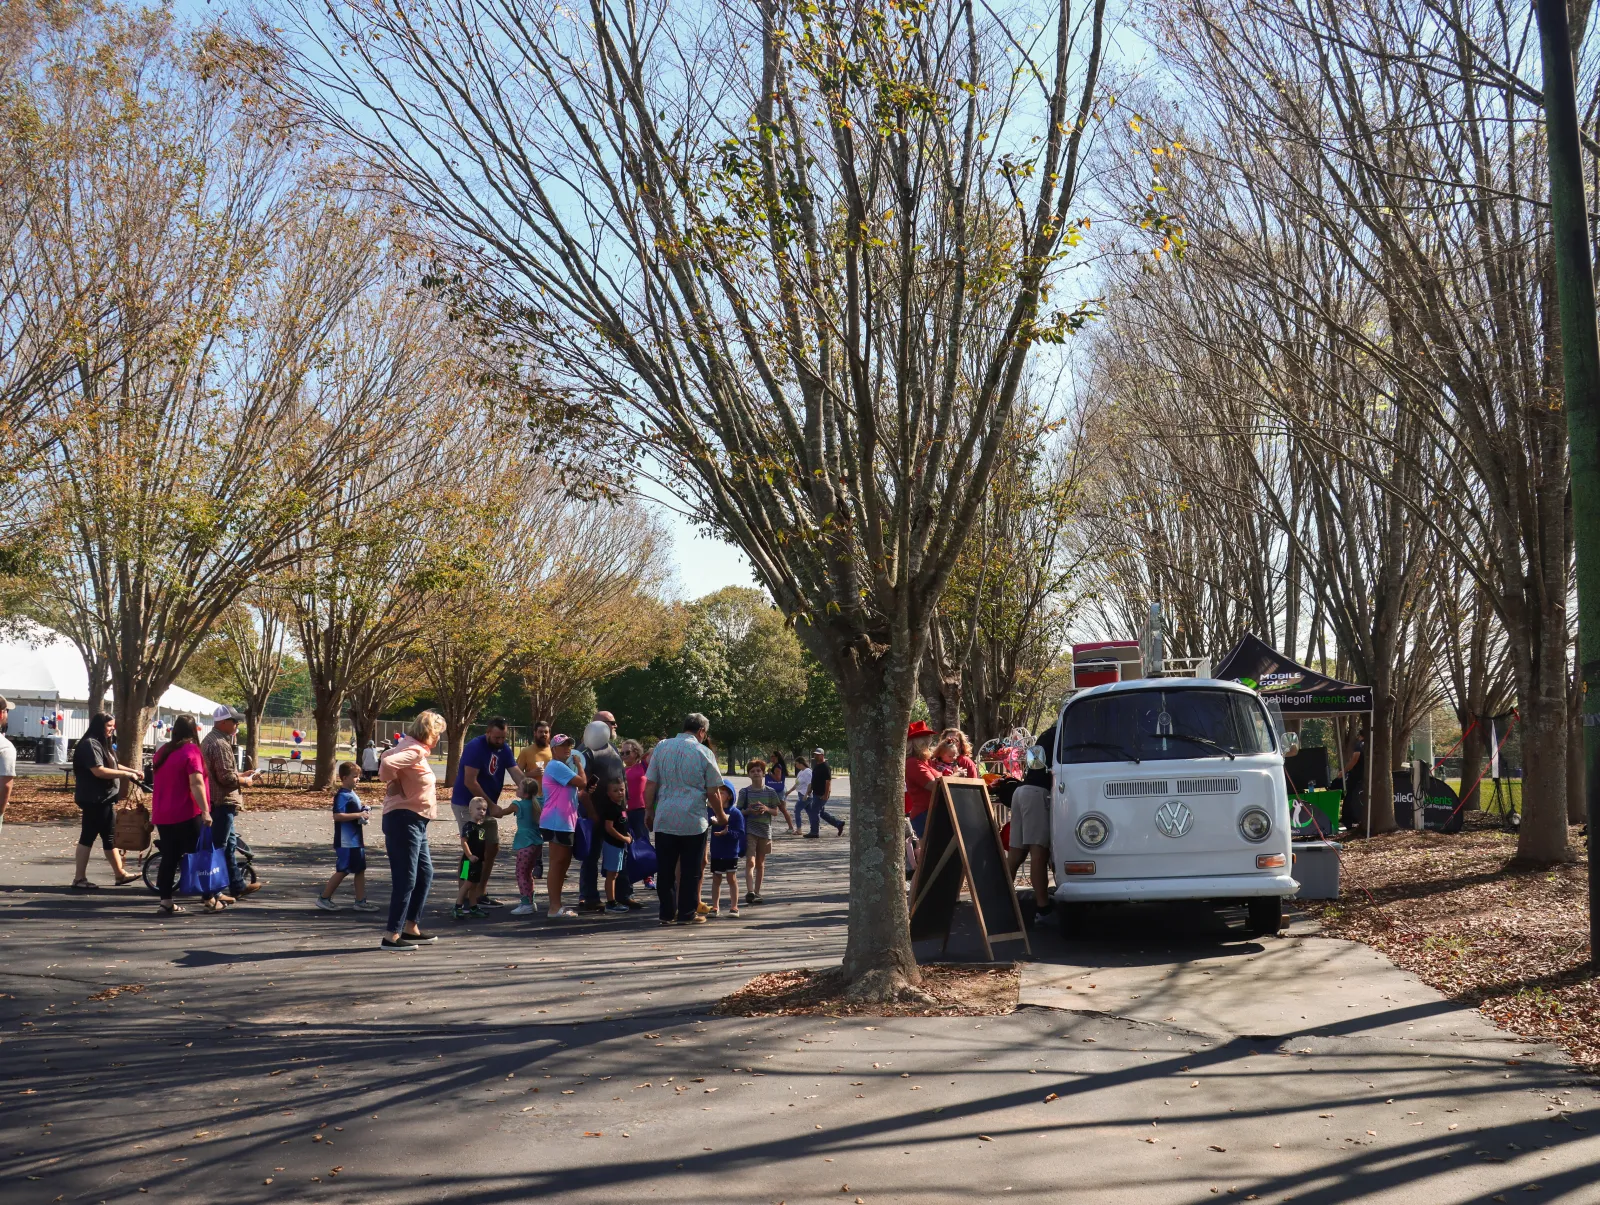 a group of people walking on a street with trees and a van